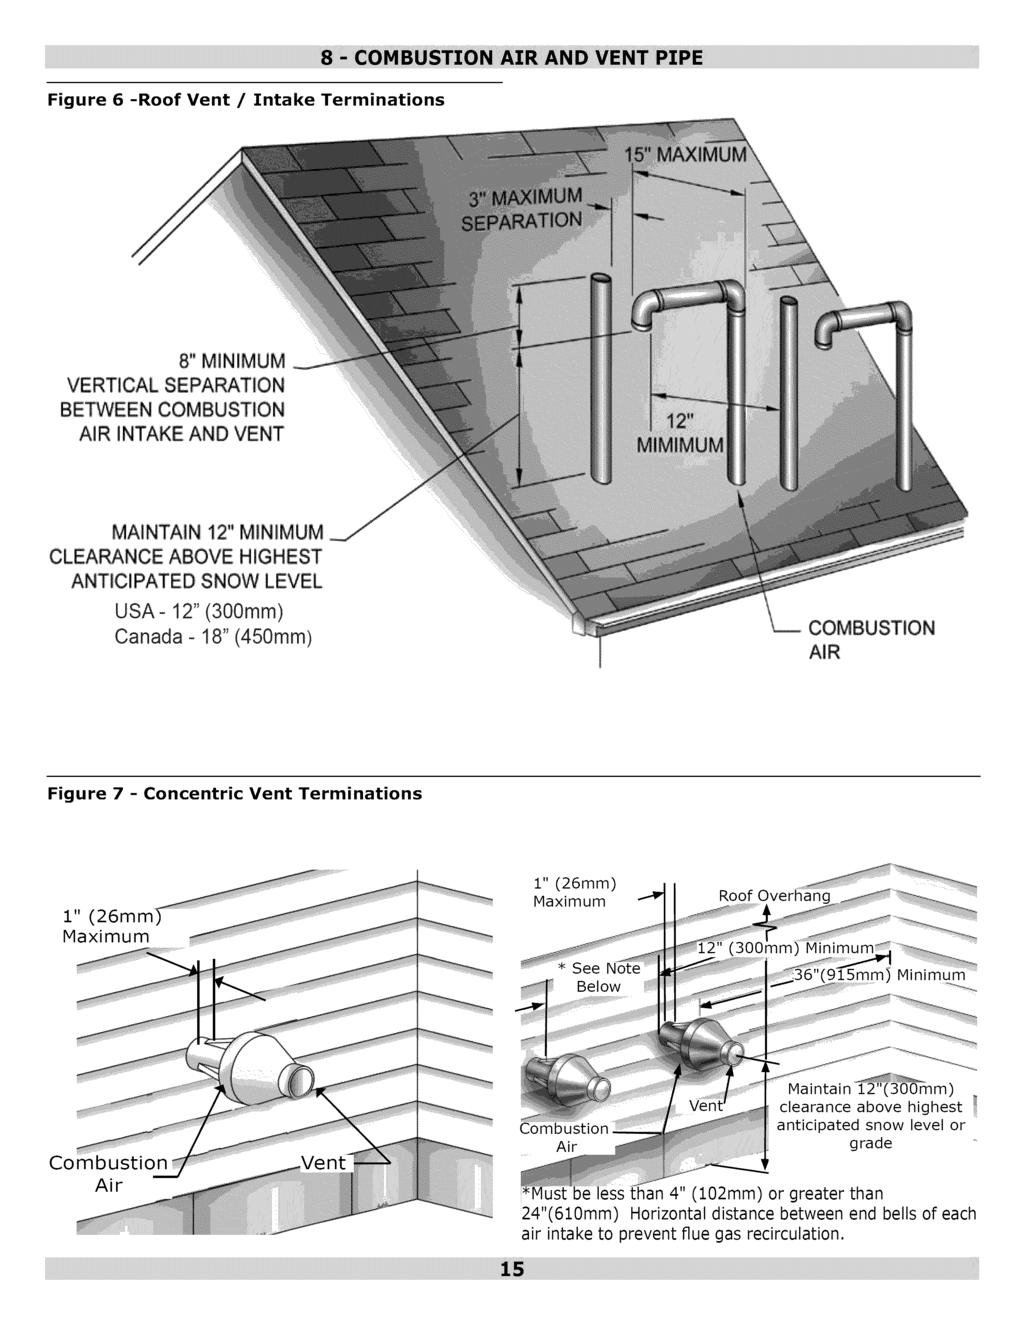 Figure 6 -Roof Vent / Intake Terminations 8" MINIMUM VERTICAL SEPARATION BETWEEN COMBUSTION AIR INTAKE AND VENT MAiNTAiN 12" MiNiMUM _-" CLEARANCE ABOVE HIGHEST ANTICIPATED SNOW LEVEL USA- 12"